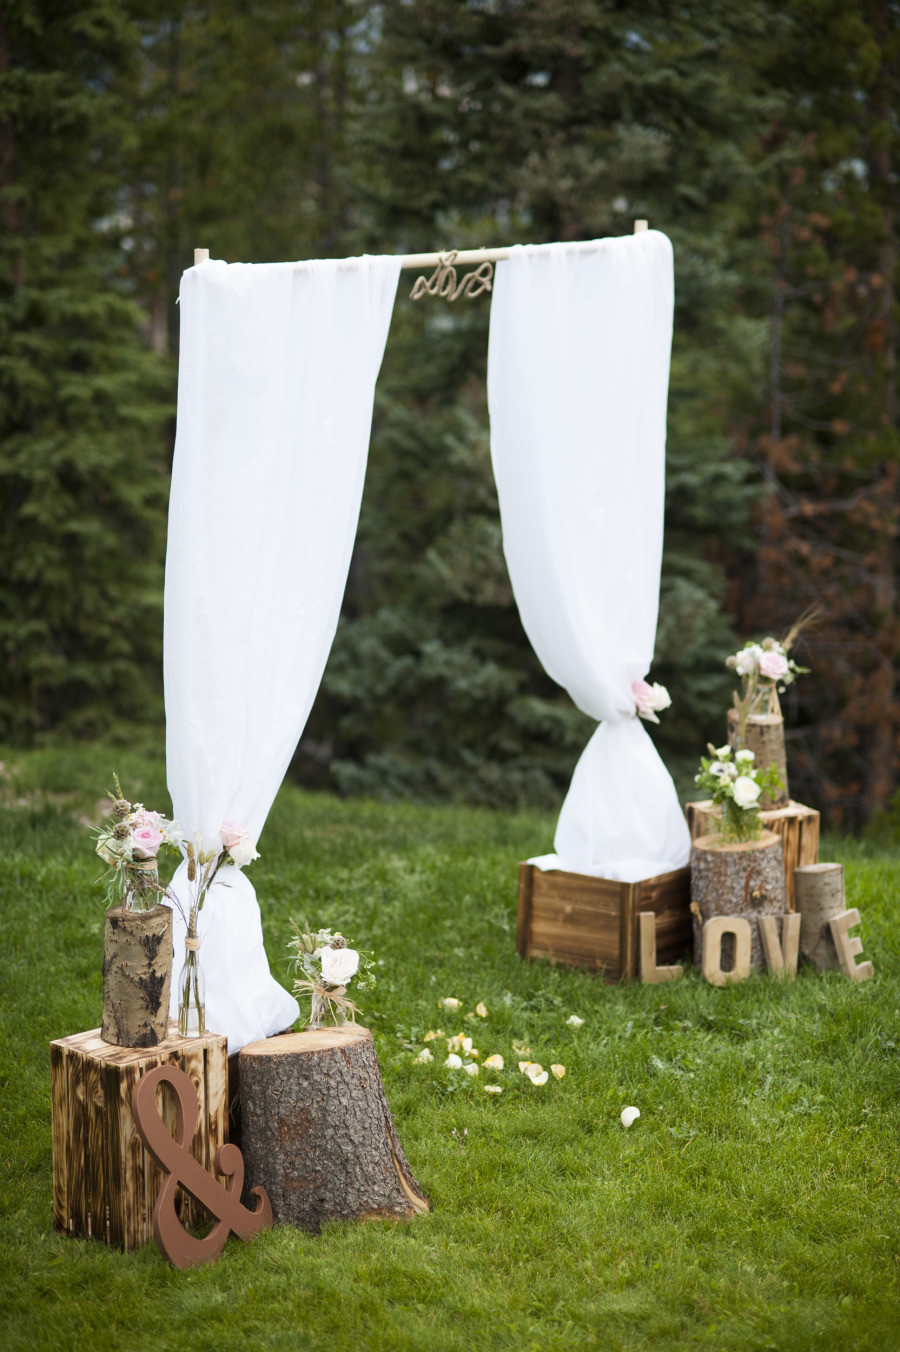 Country Wedding Decoration Ideas
 Say “I Do” to These Fab 51 Rustic Wedding Decorations